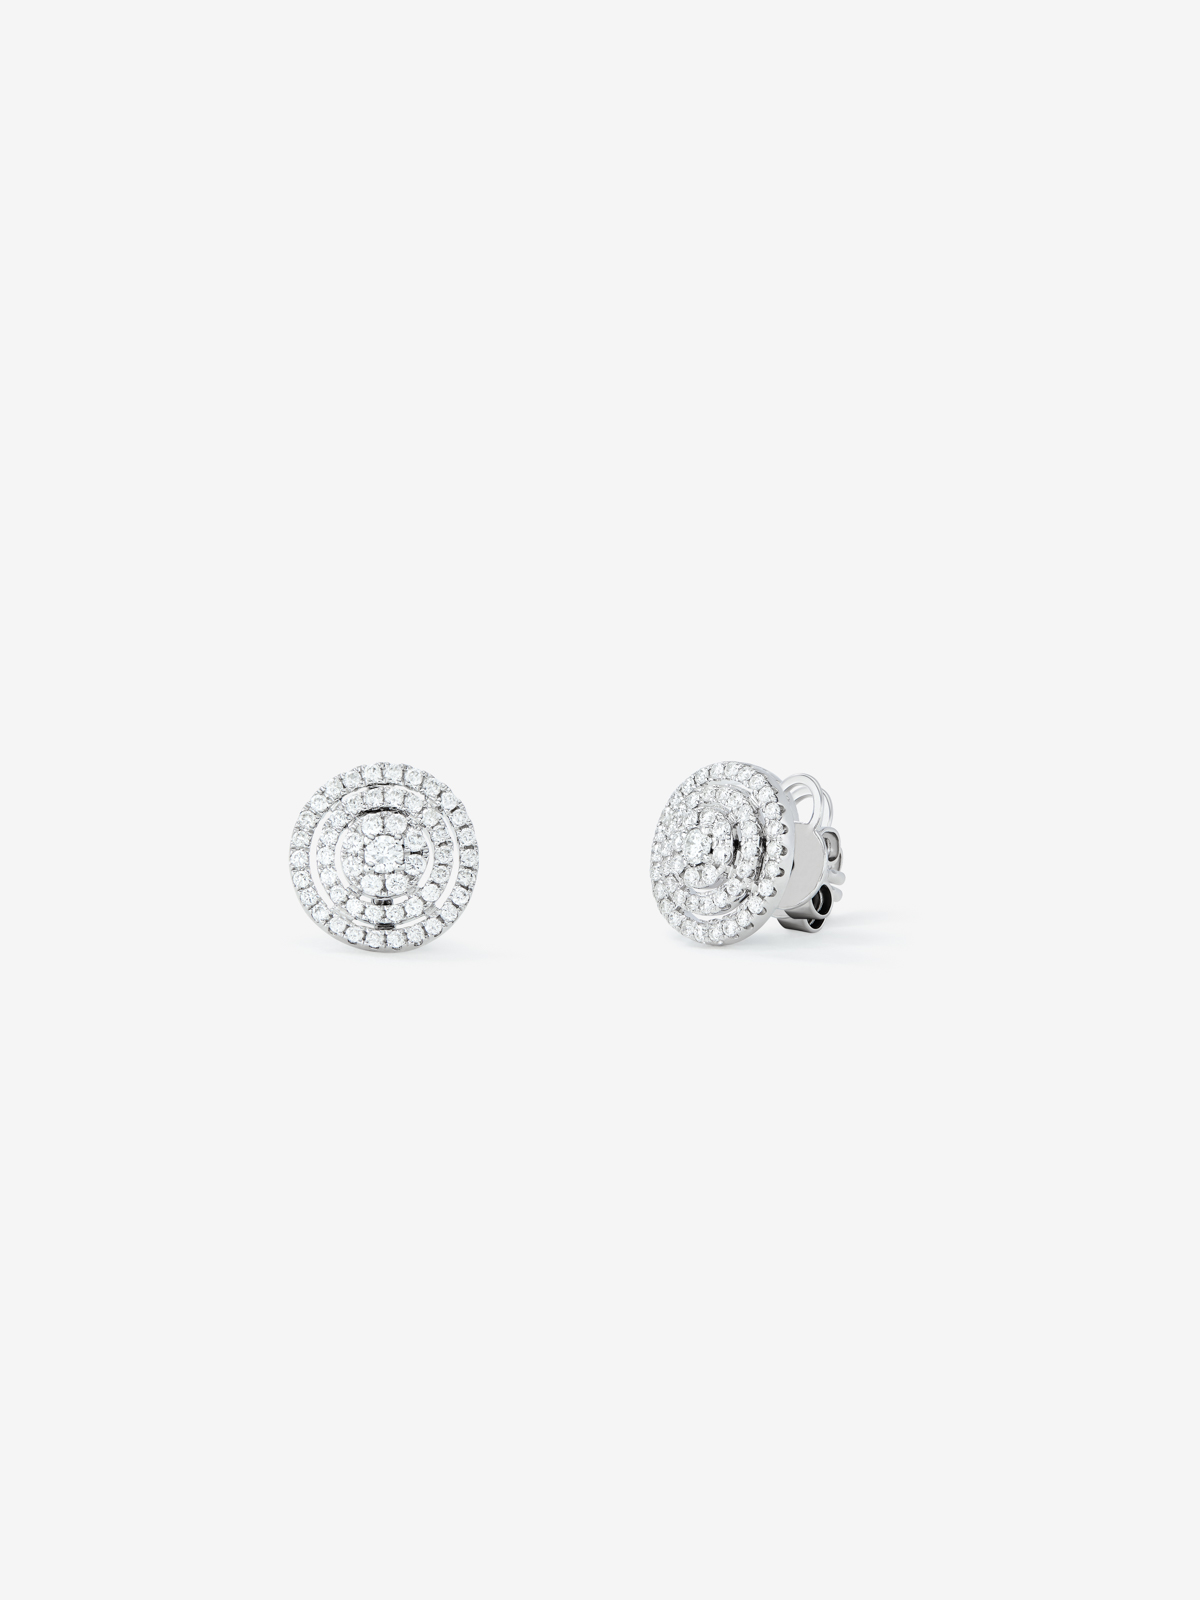 18K white gold earrings with pave diamonds.